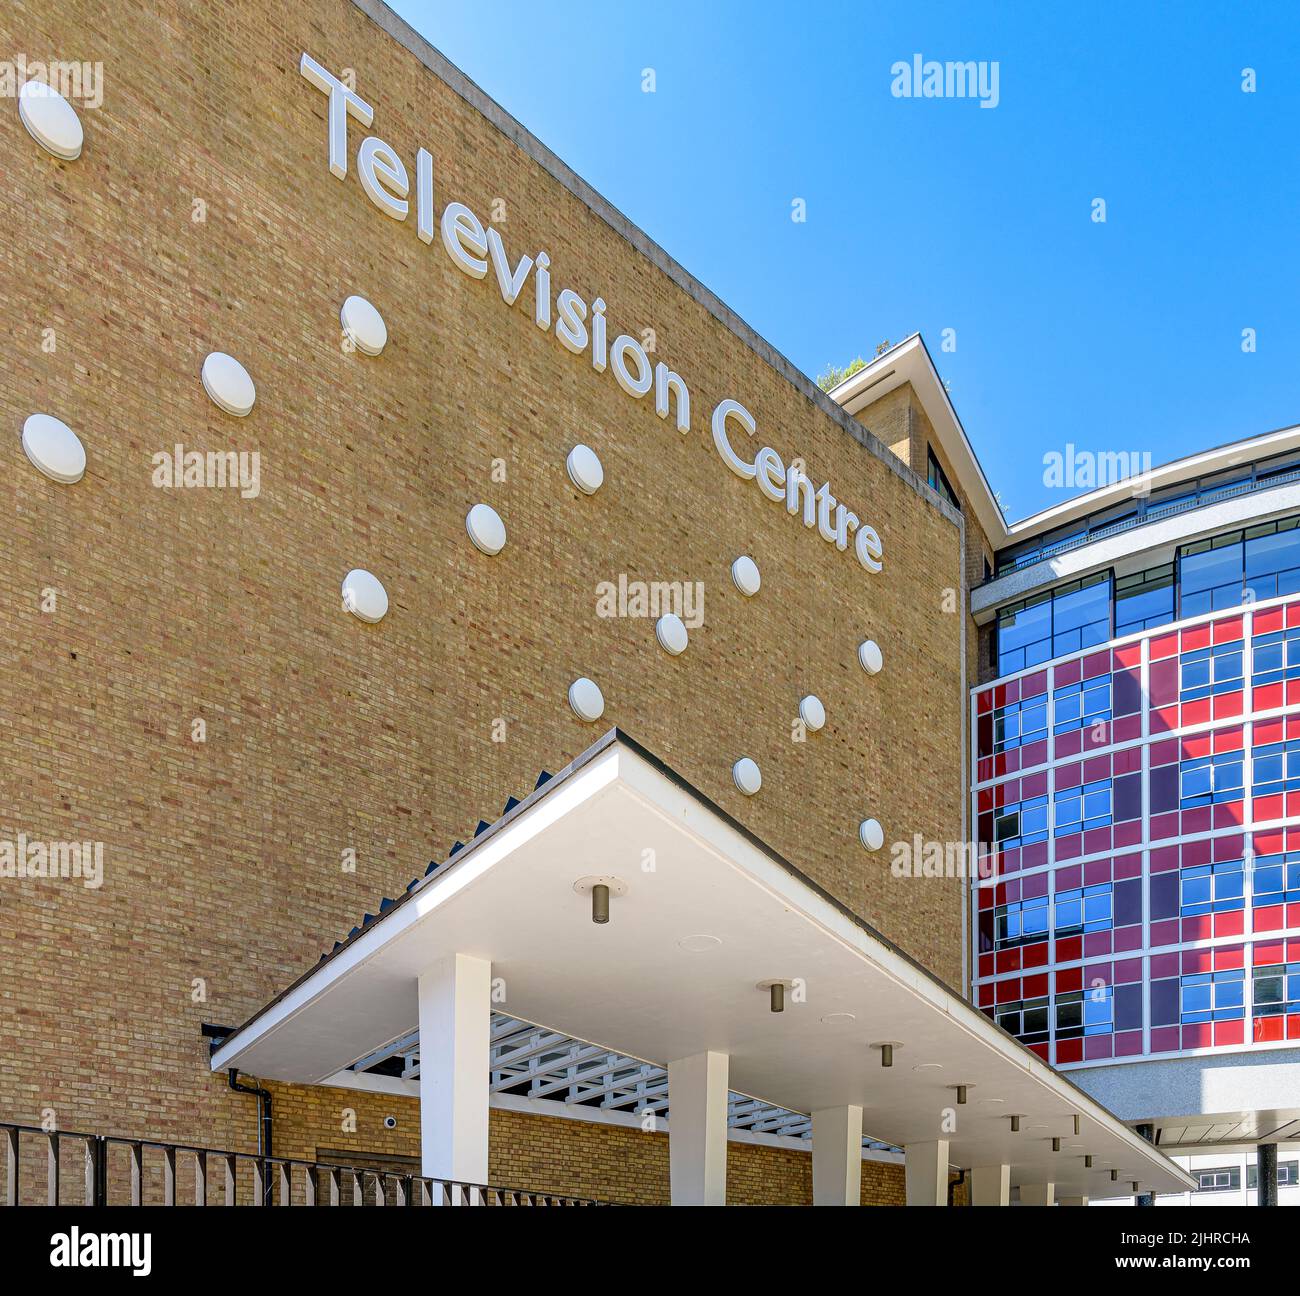 Iconic BBC Television Centre in Shepherd’s Bush. Renamed just Television Centre, has been converted into apartments, hotel and leisure facilities. Stock Photo